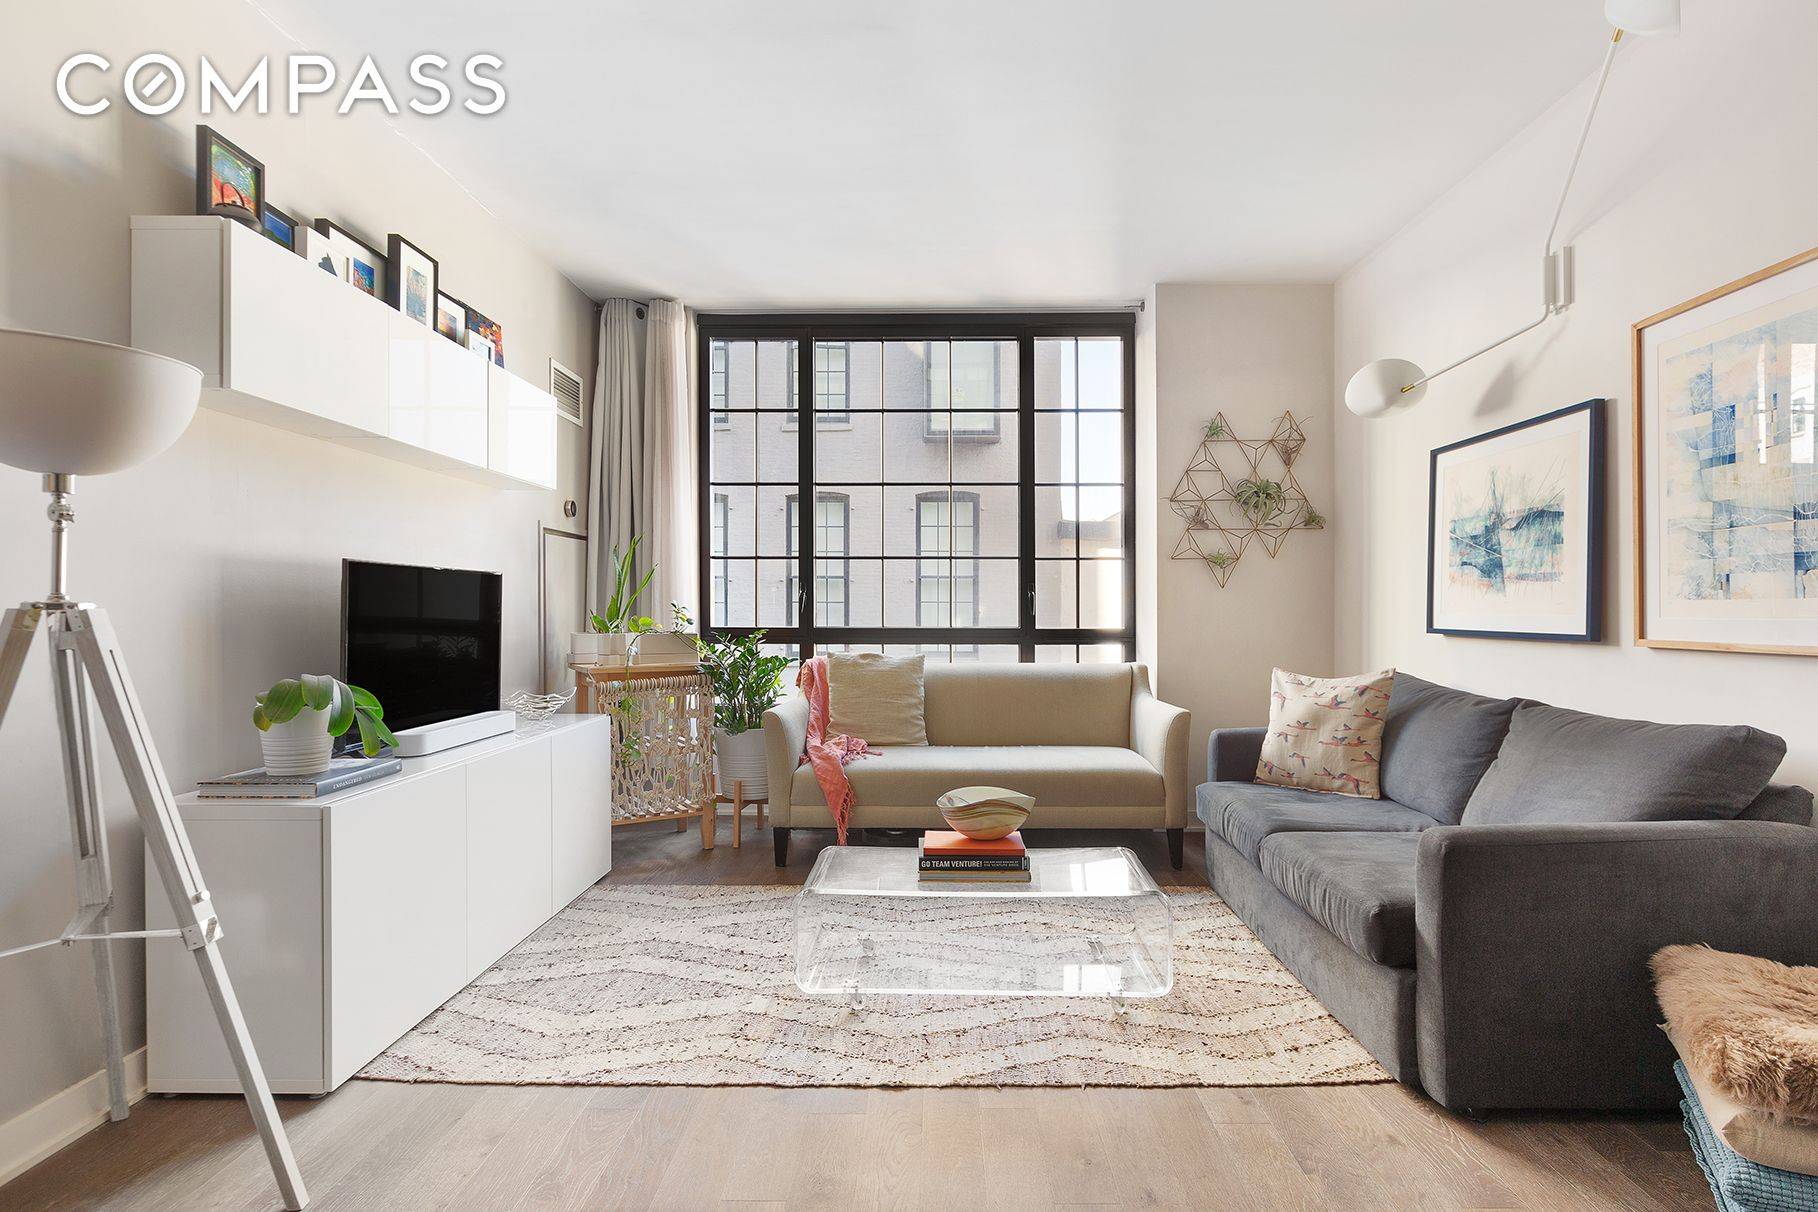 Available 5 1 or 6 1. Ideally located on a cobblestone street in the heart of DUMBO is 205 Water Street.